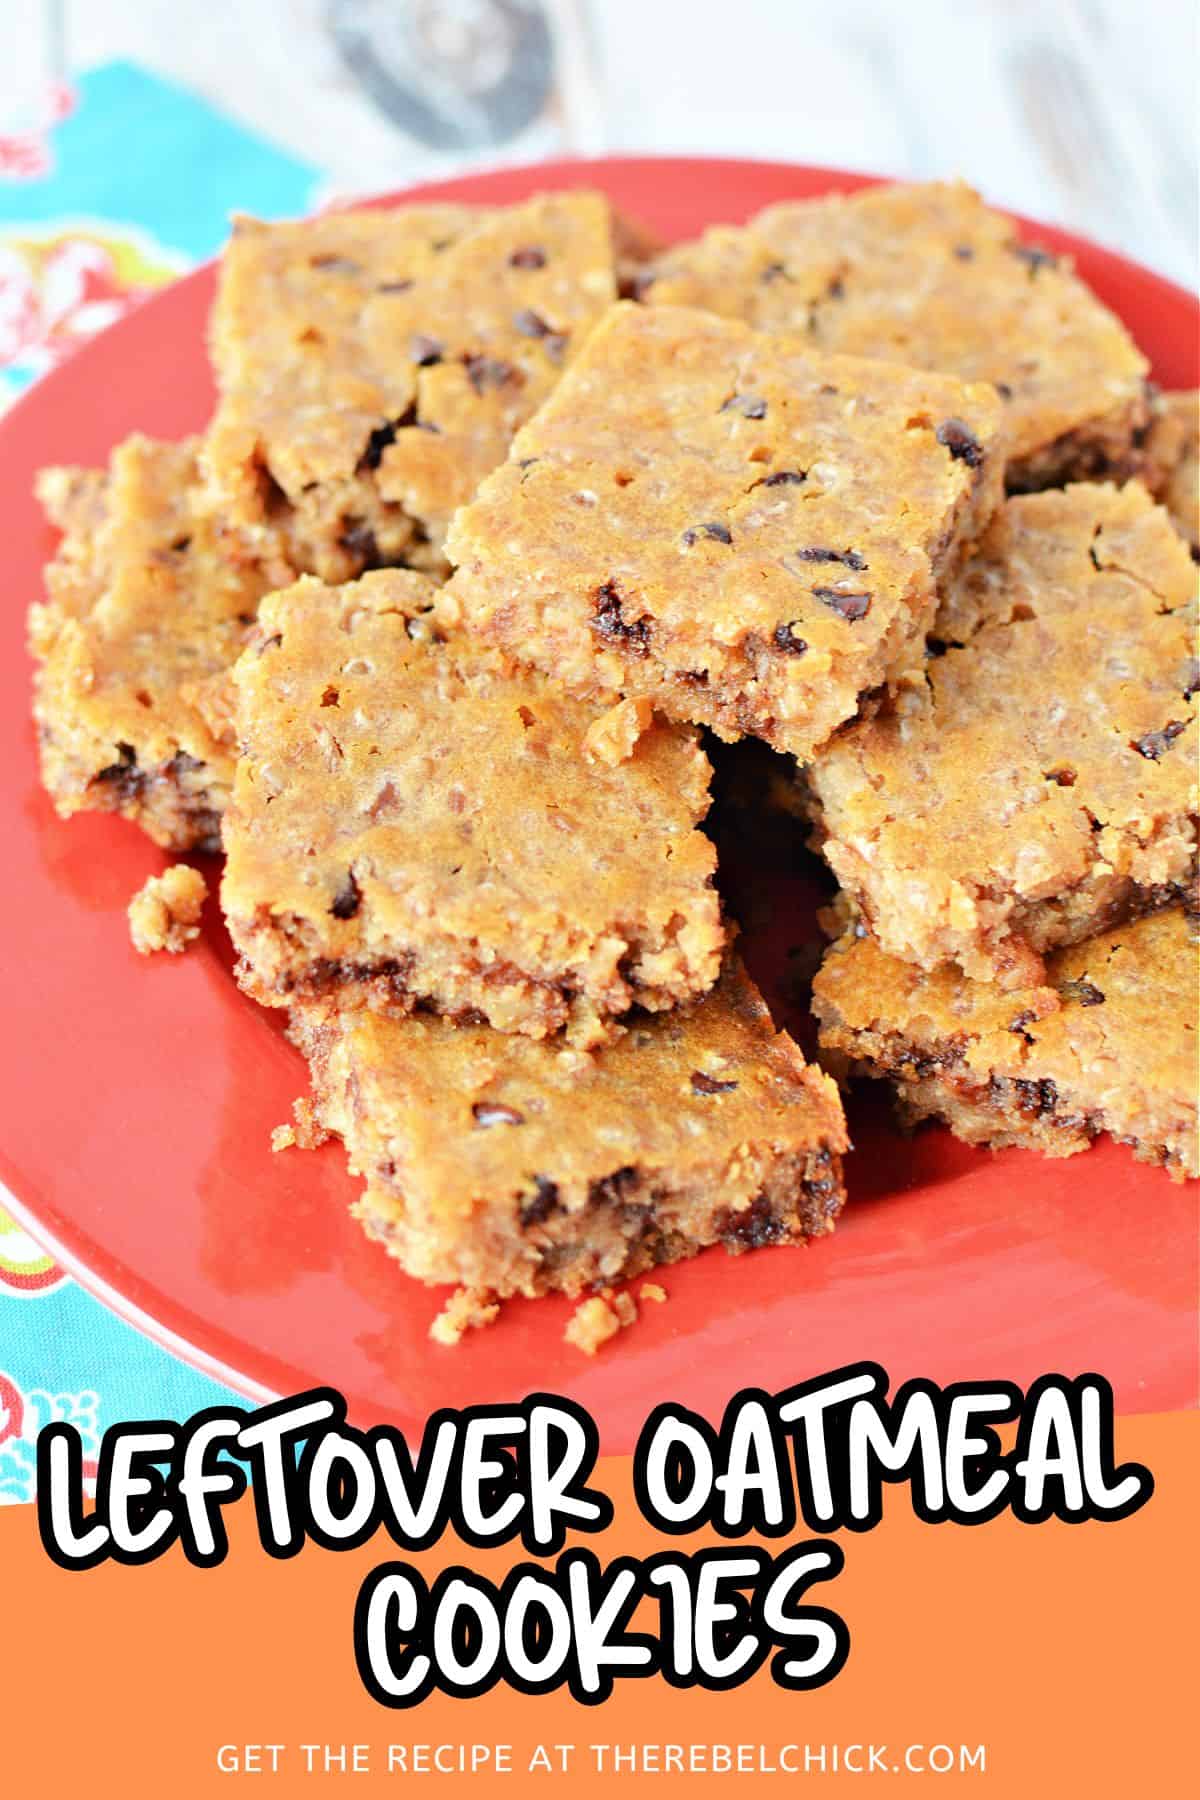 Leftover Oatmeal Cookies